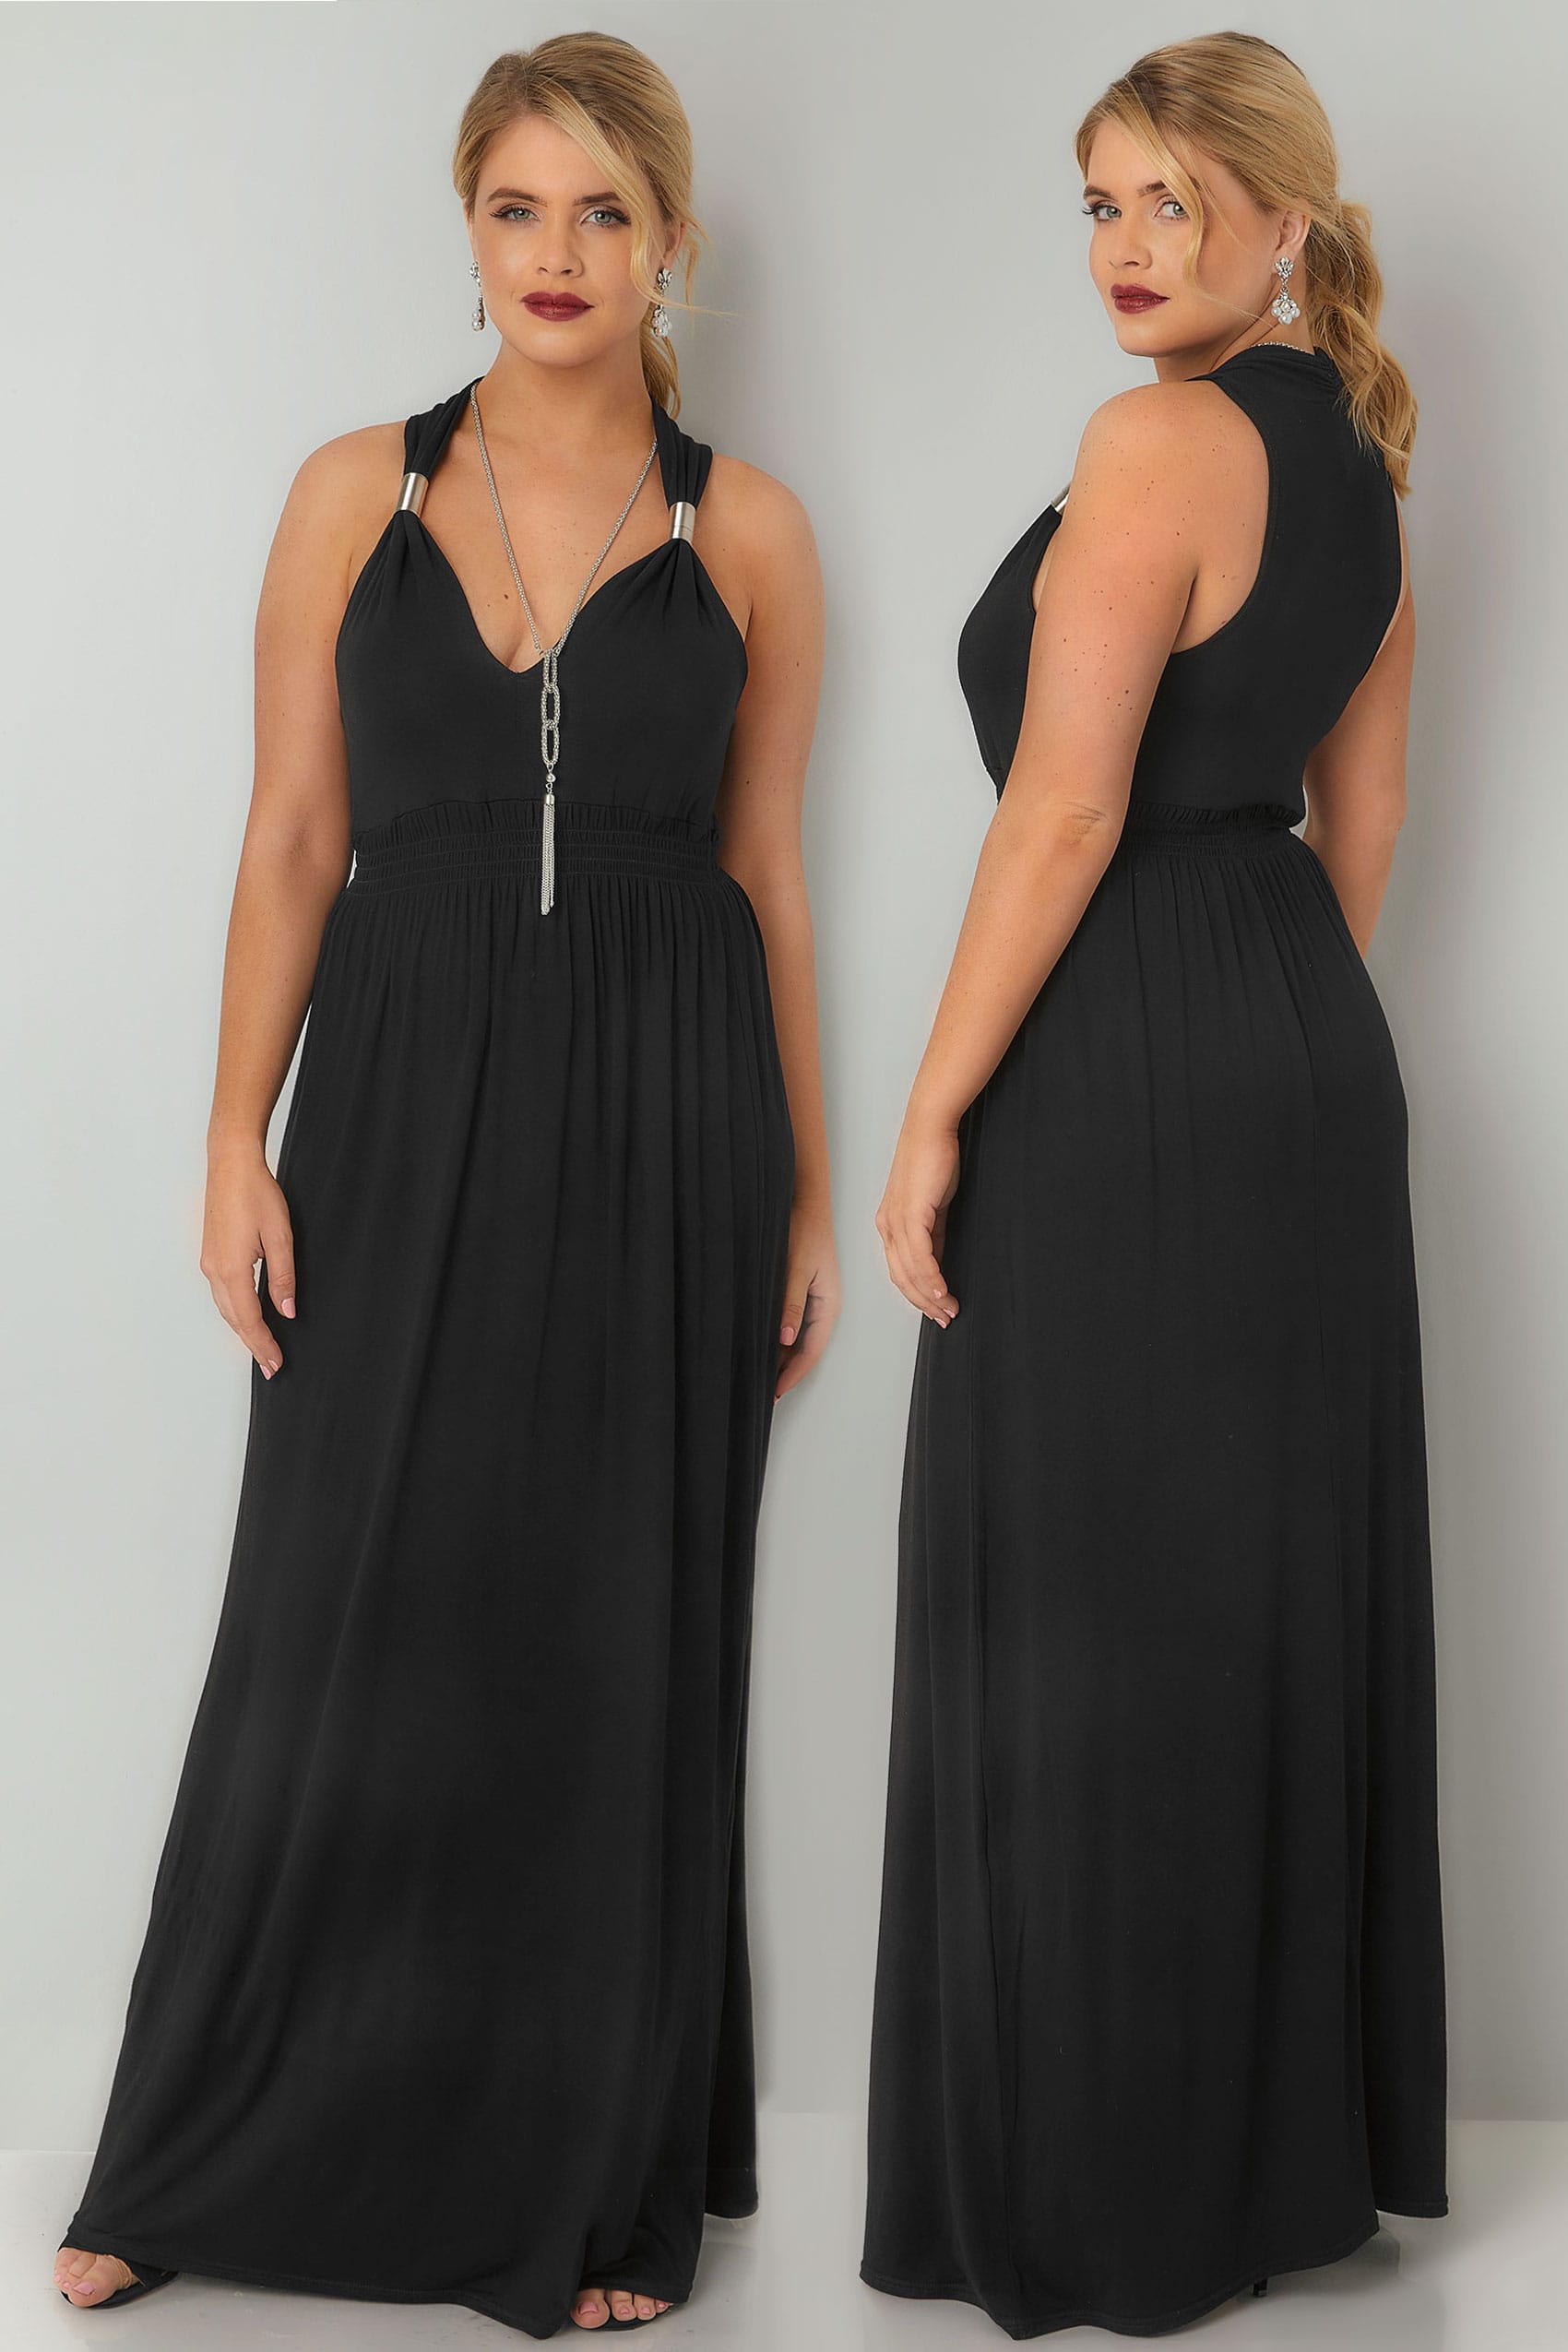 Black Sleeveless Maxi Dress With Spring Details & Free Necklace, Plus ...